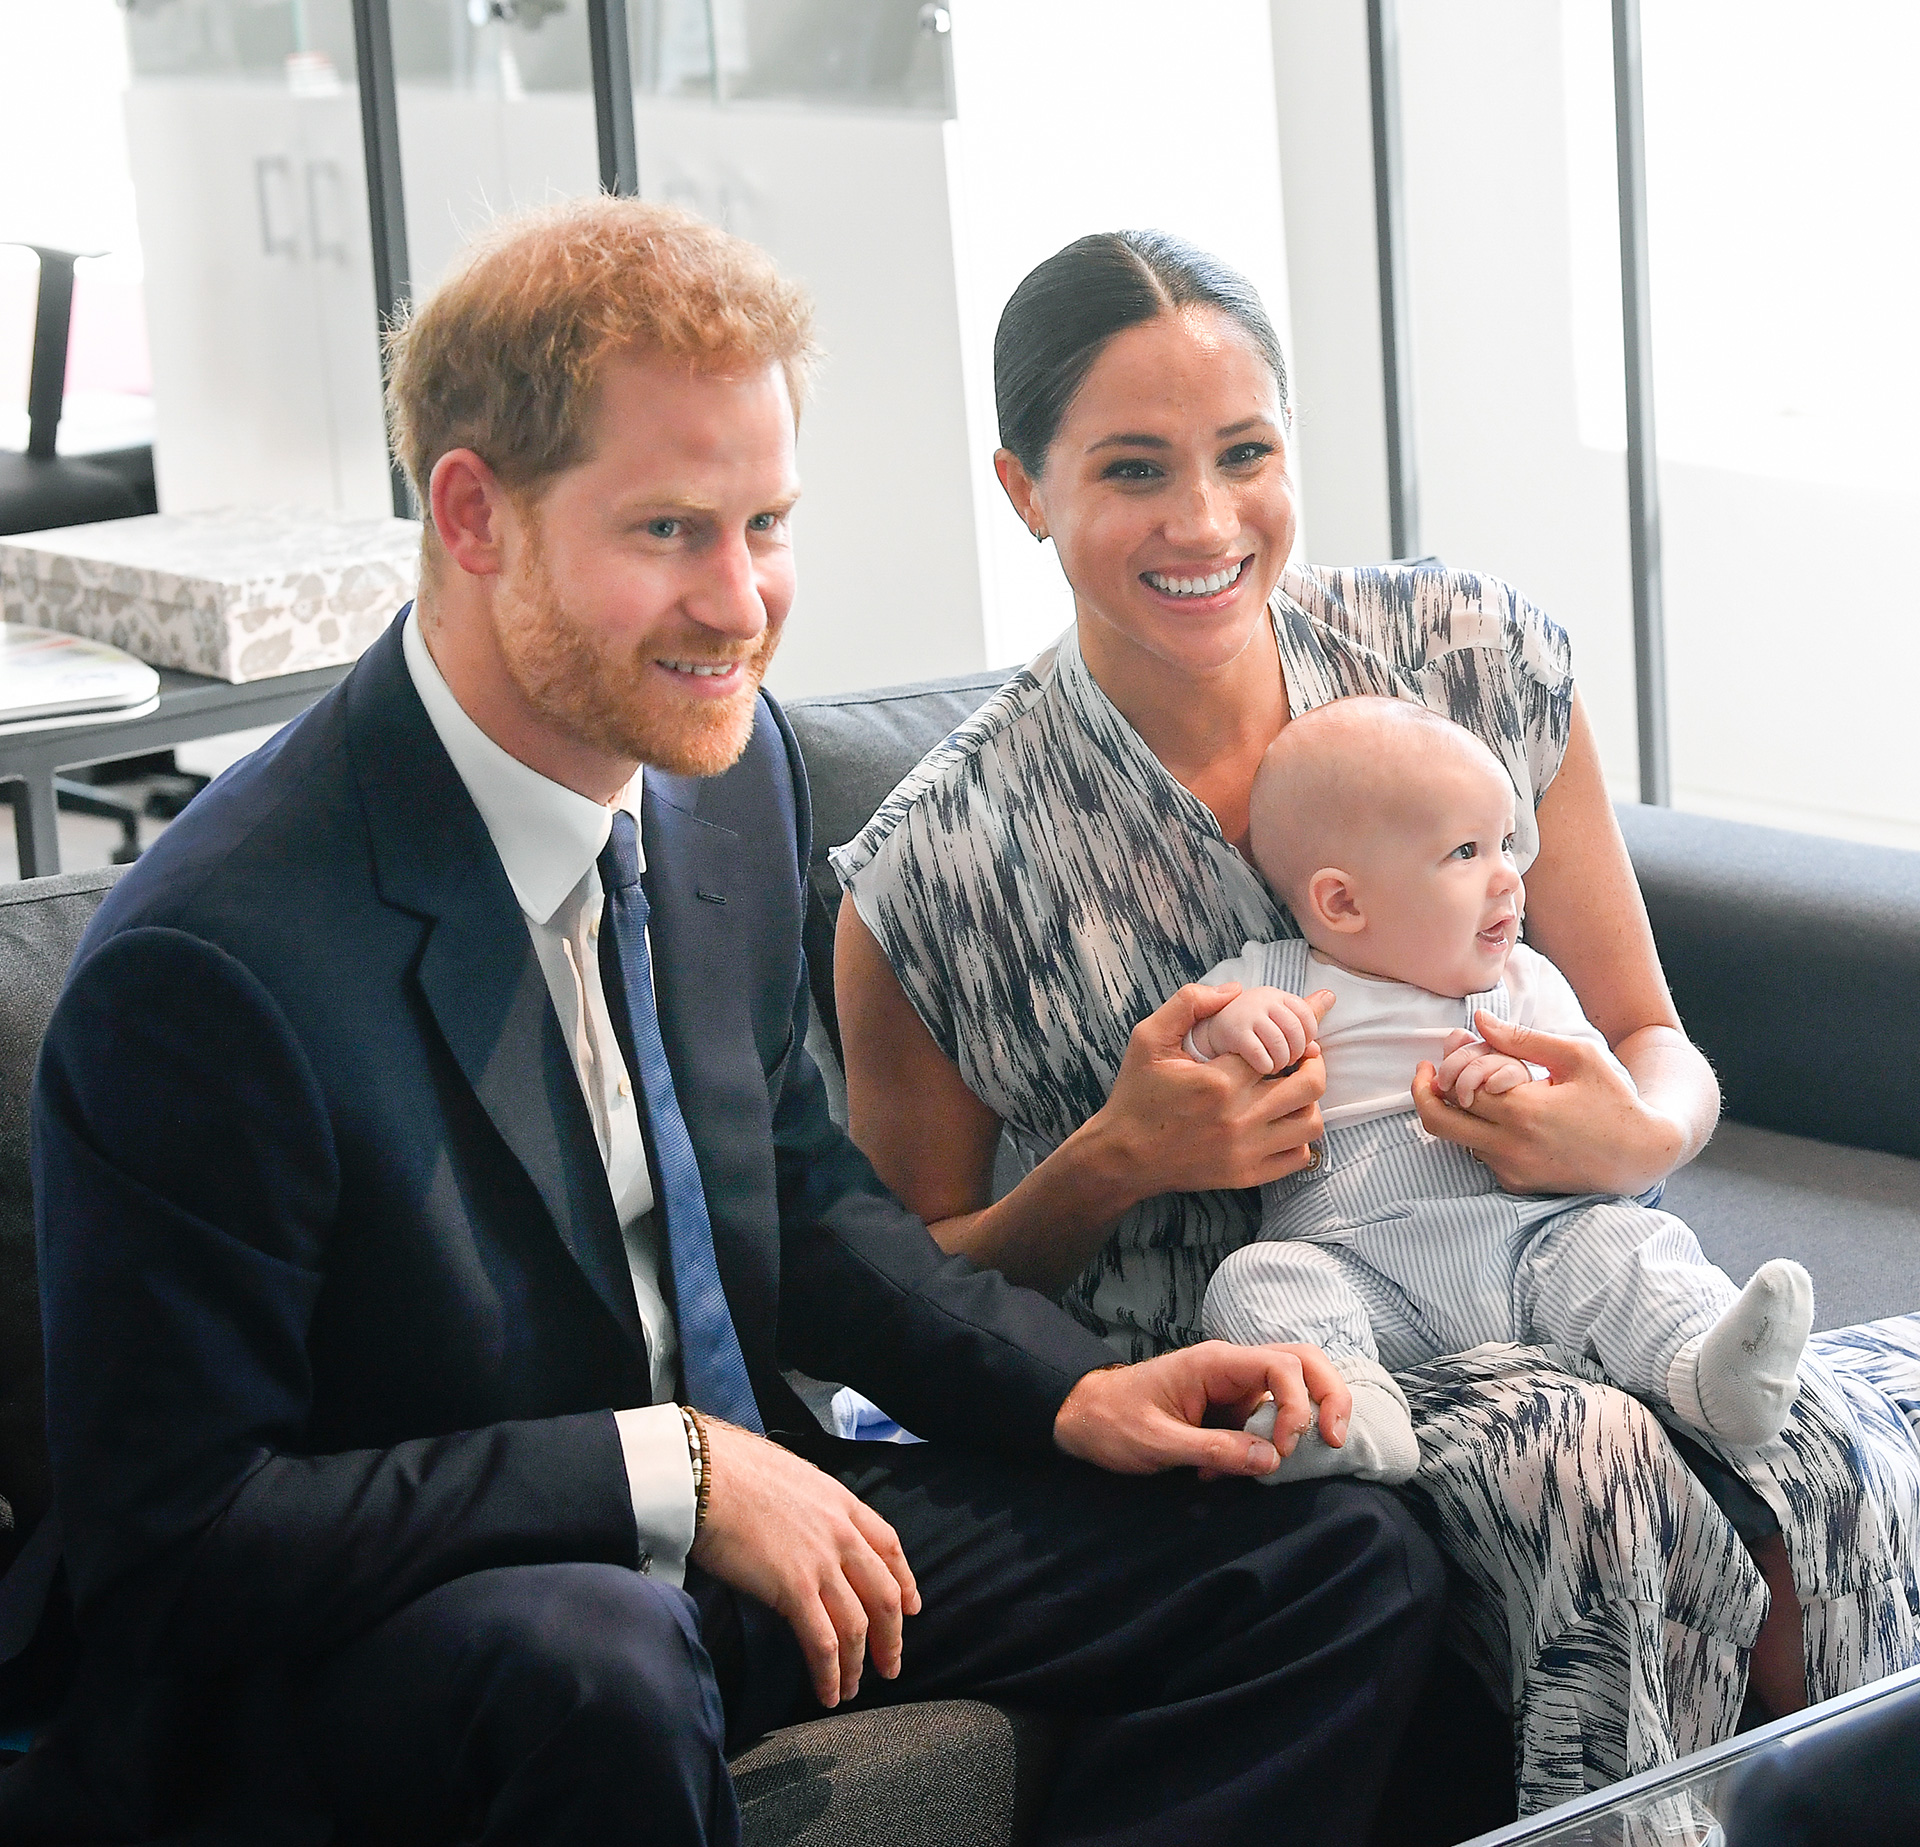 File photo of Prince Harry and Duchess Meghan with their son Archie on September 25, 2019 in Cape Town, South Africa (Photo: Toby Melville)